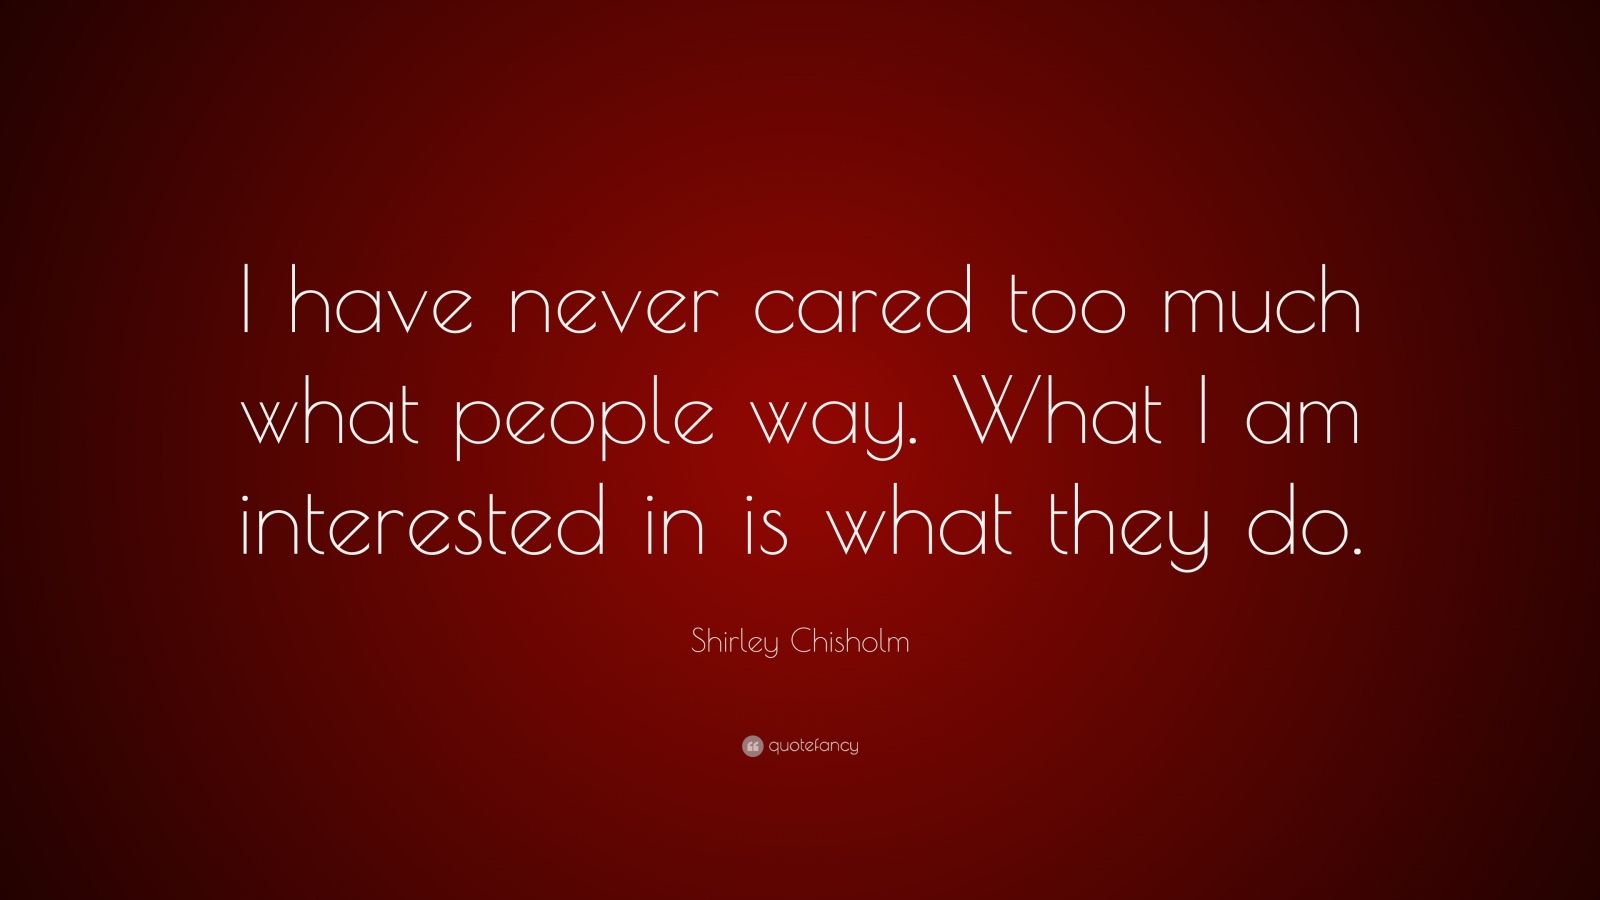 Shirley Chisholm Quote “I have never cared too much what people way